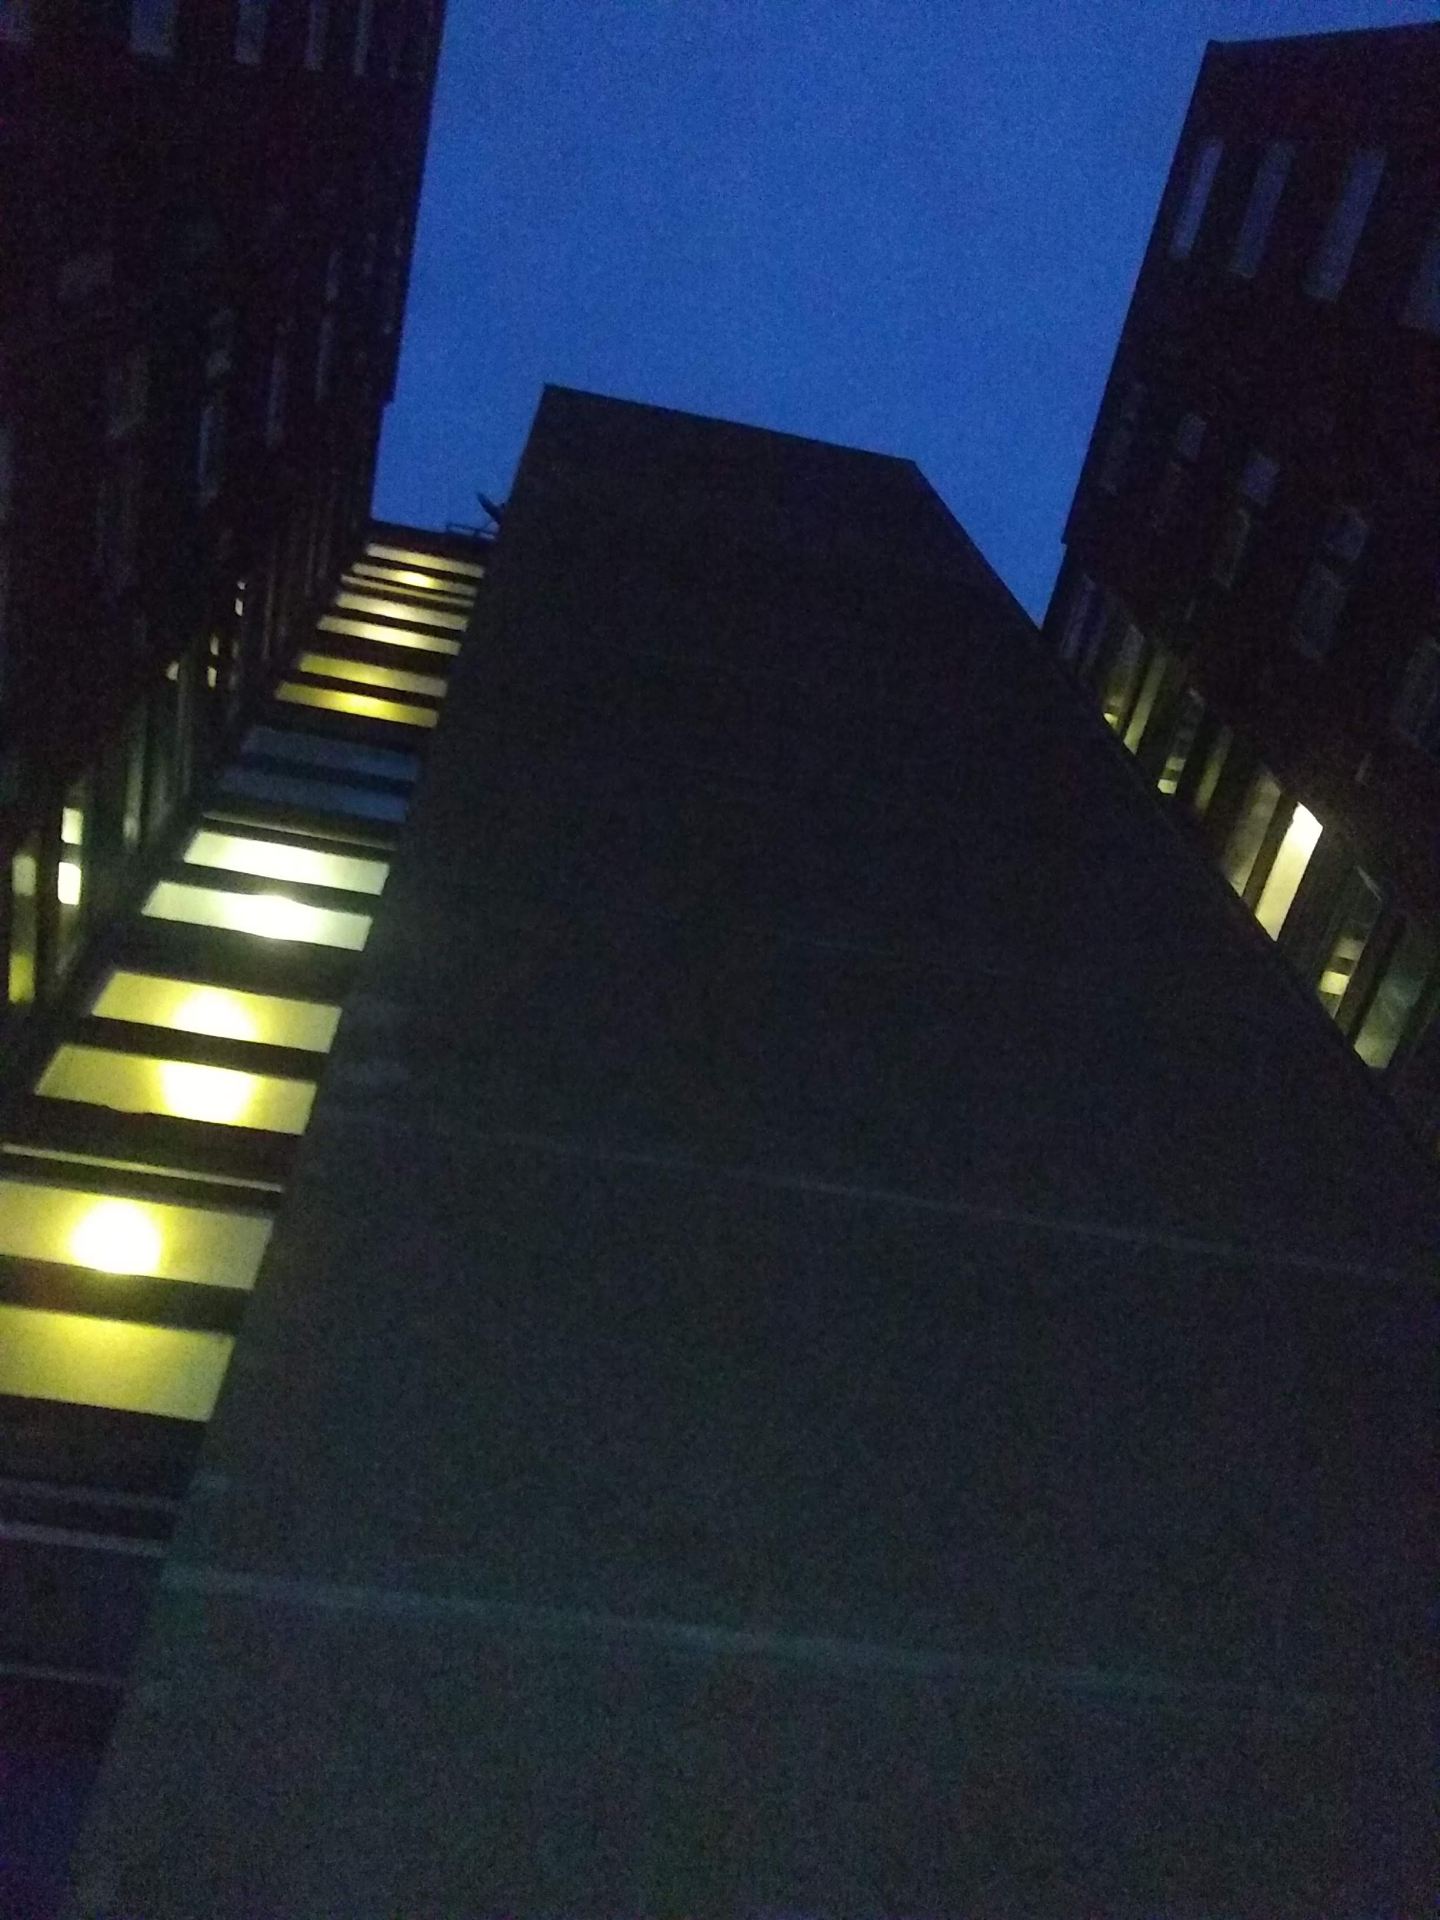 An image looking up at a high-rise.